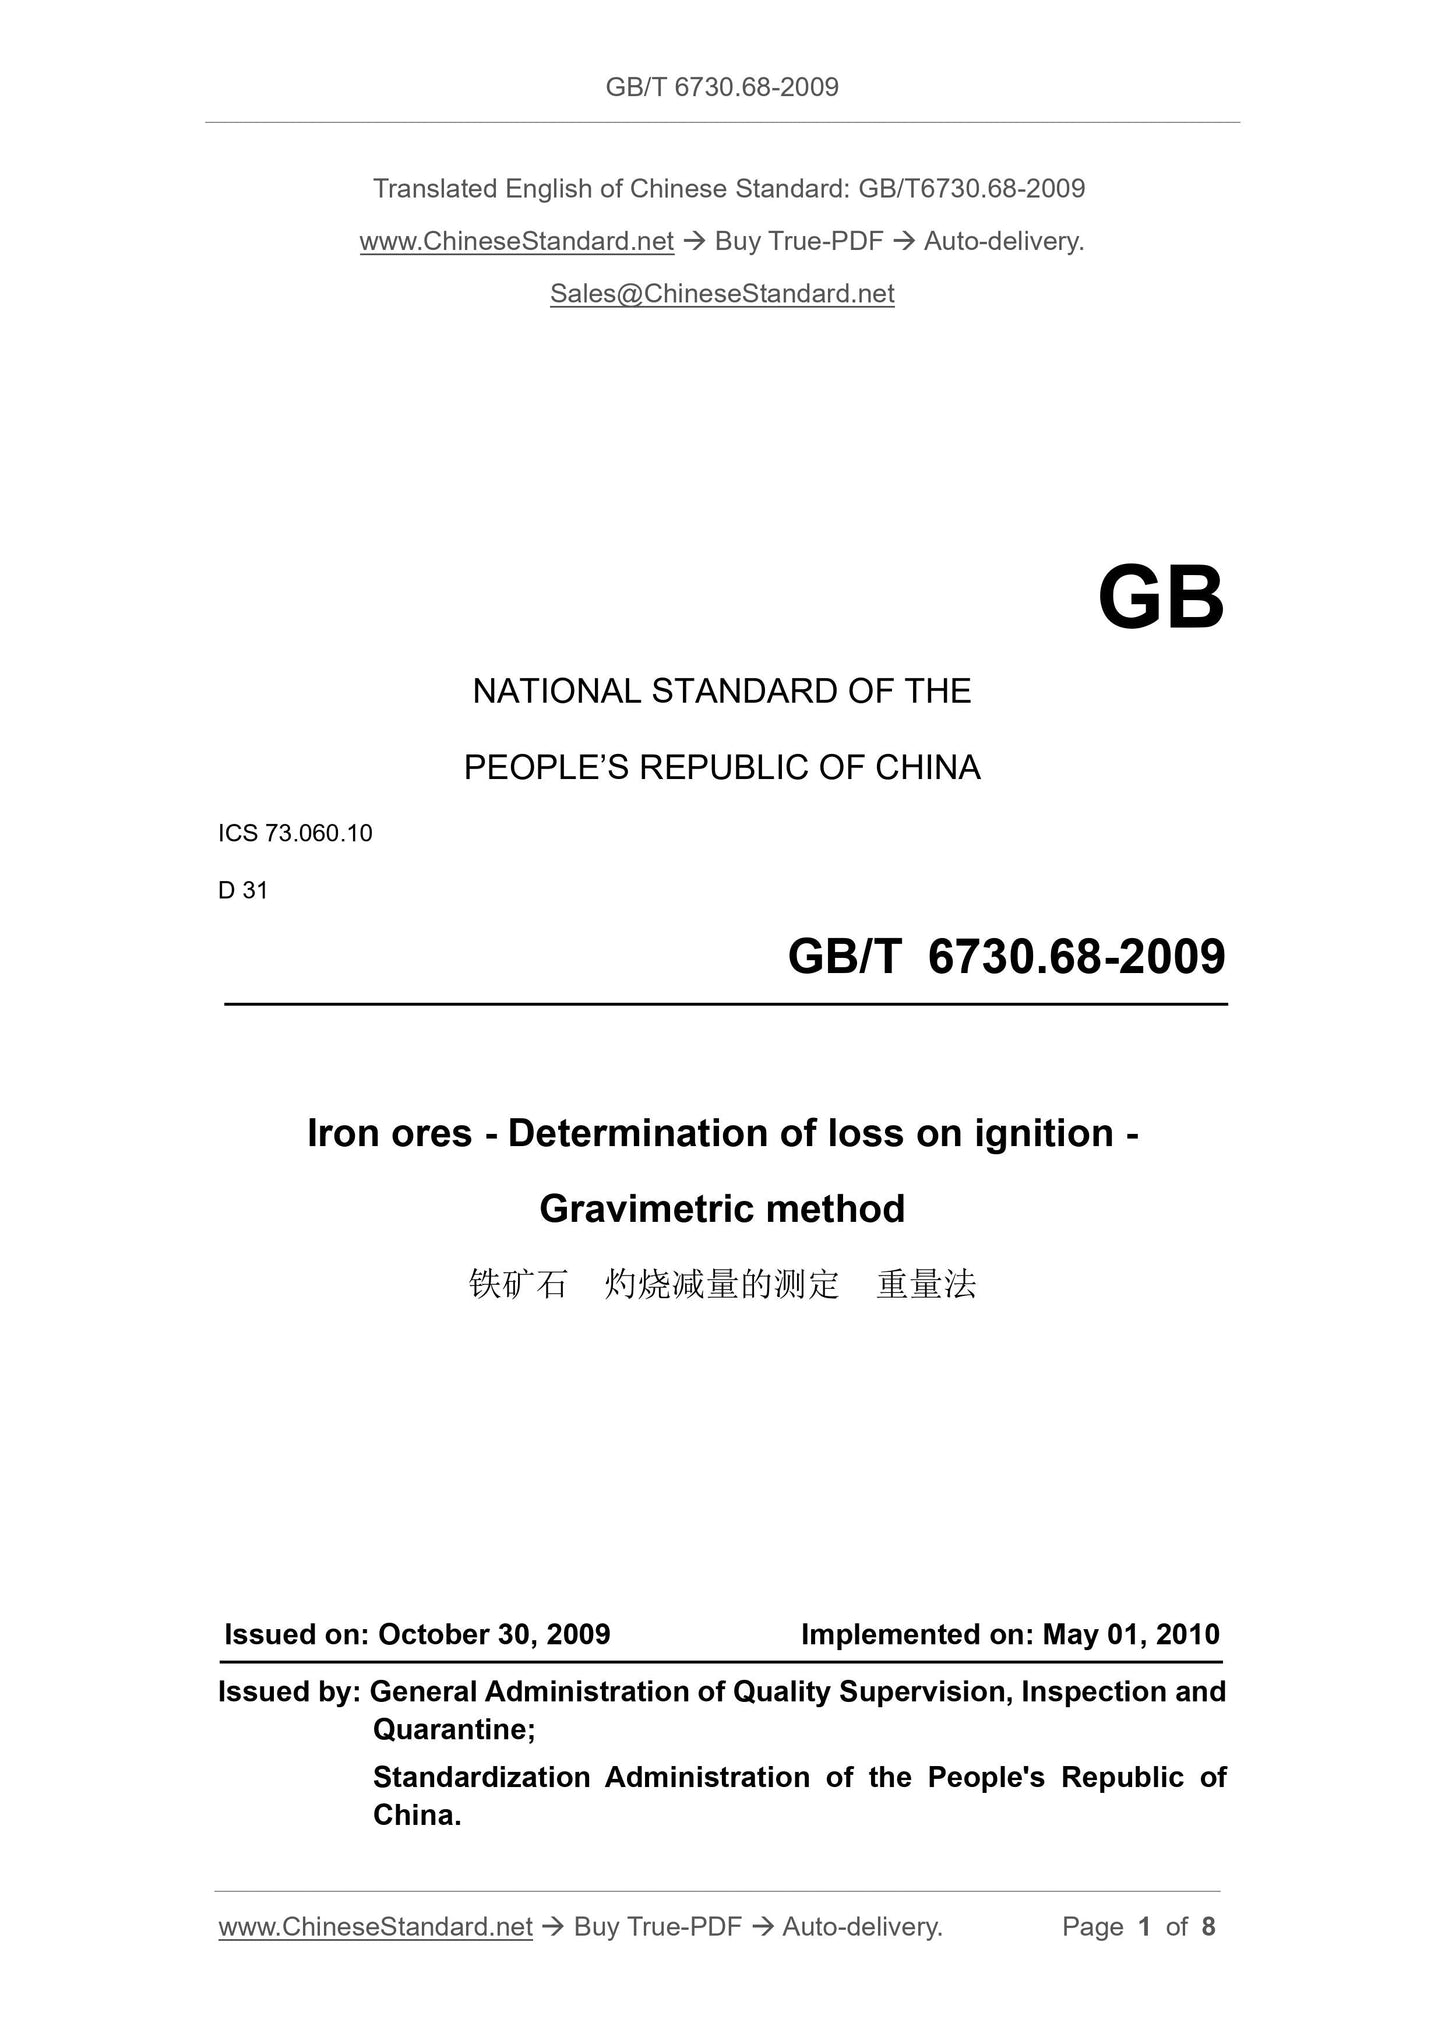 GB/T 6730.68-2009 Page 1